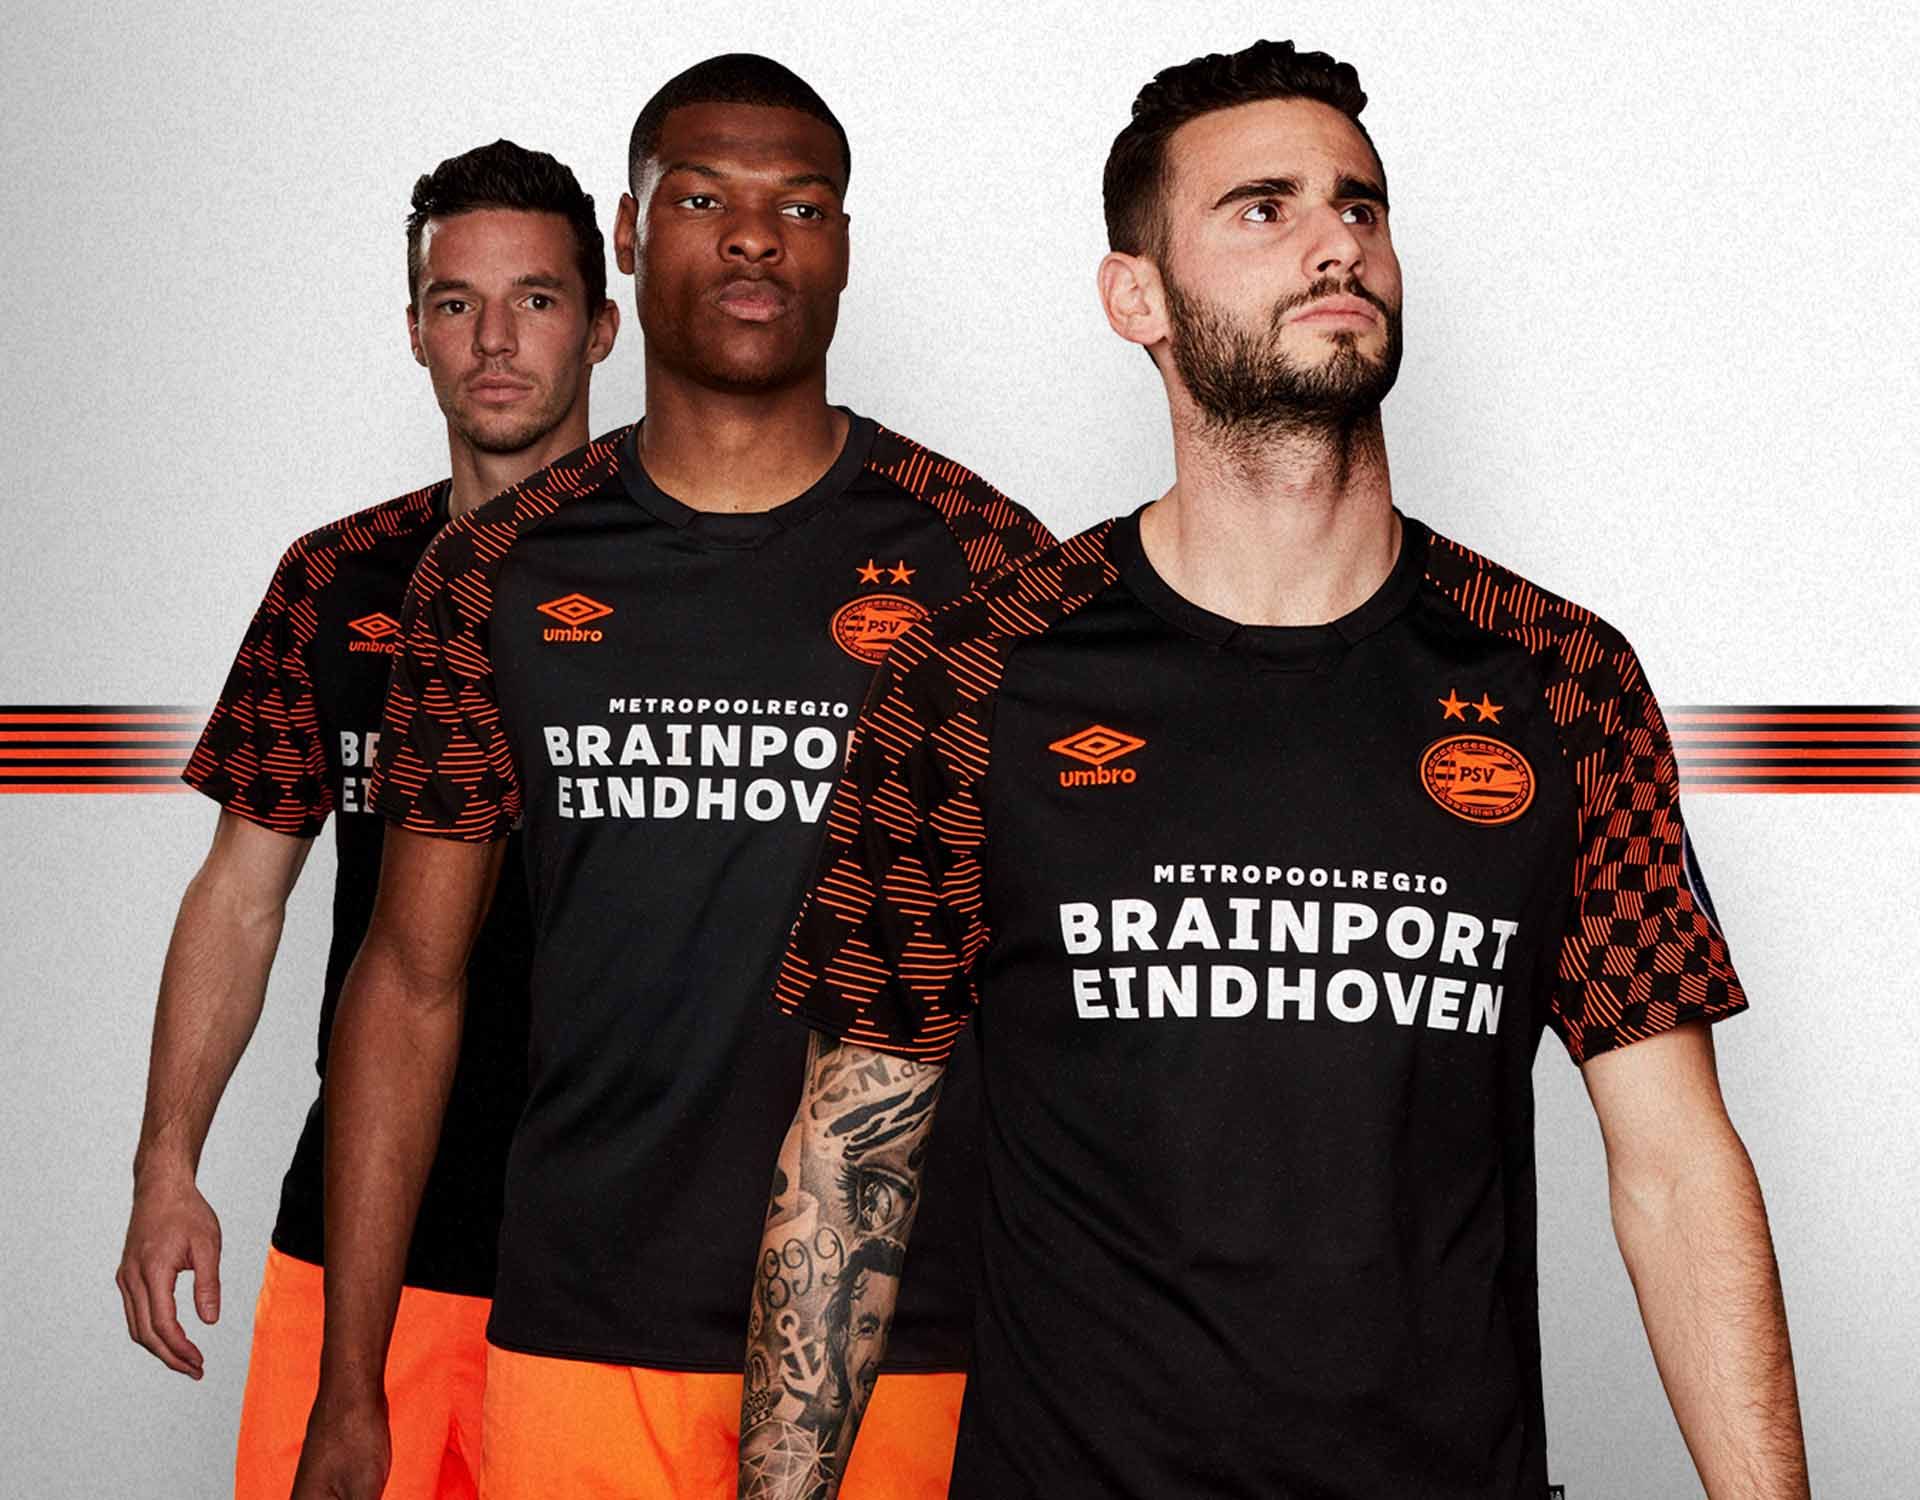 The 9 Most Stylish Football Shirts for the 2019/20 Season